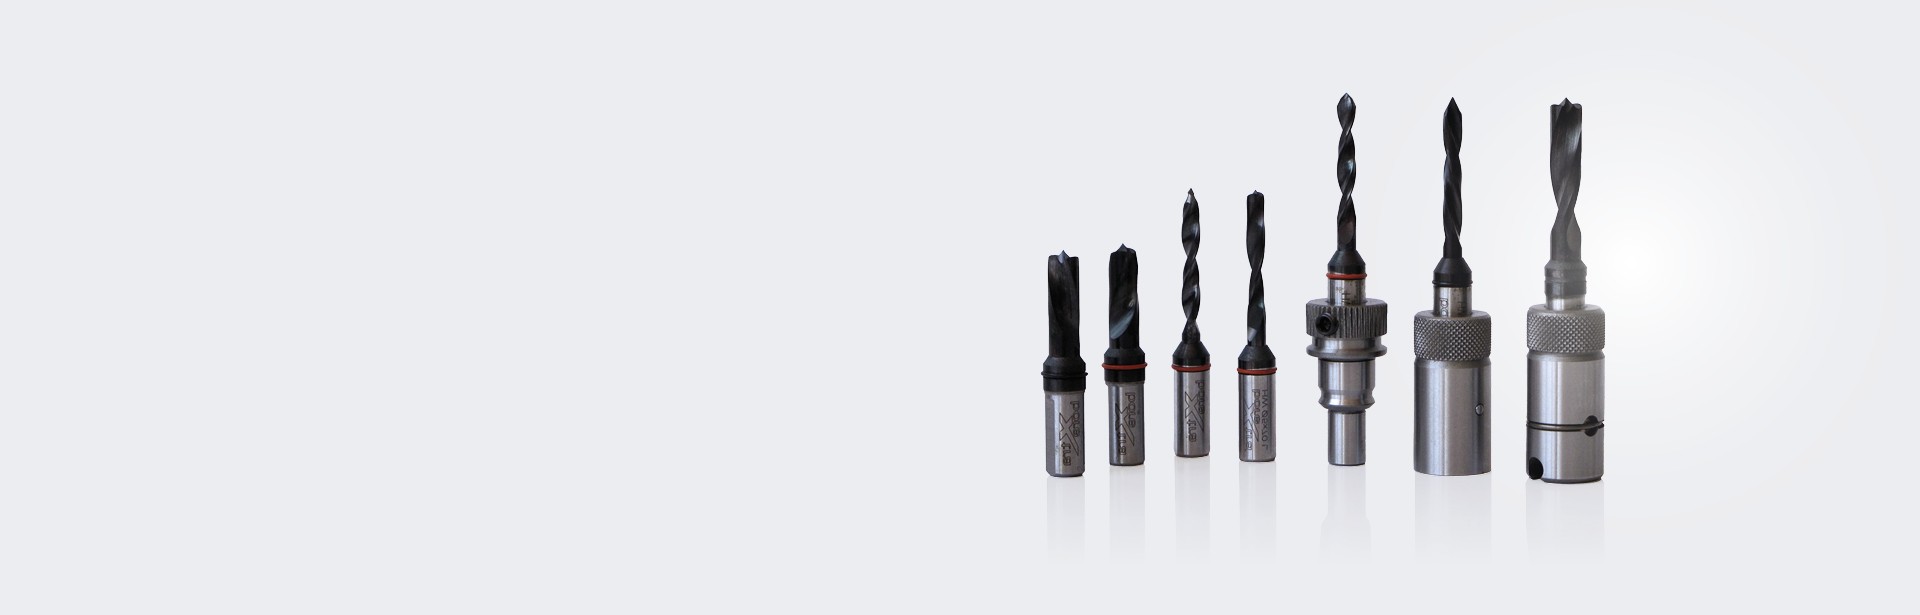 Extrabore drill bits for the industry